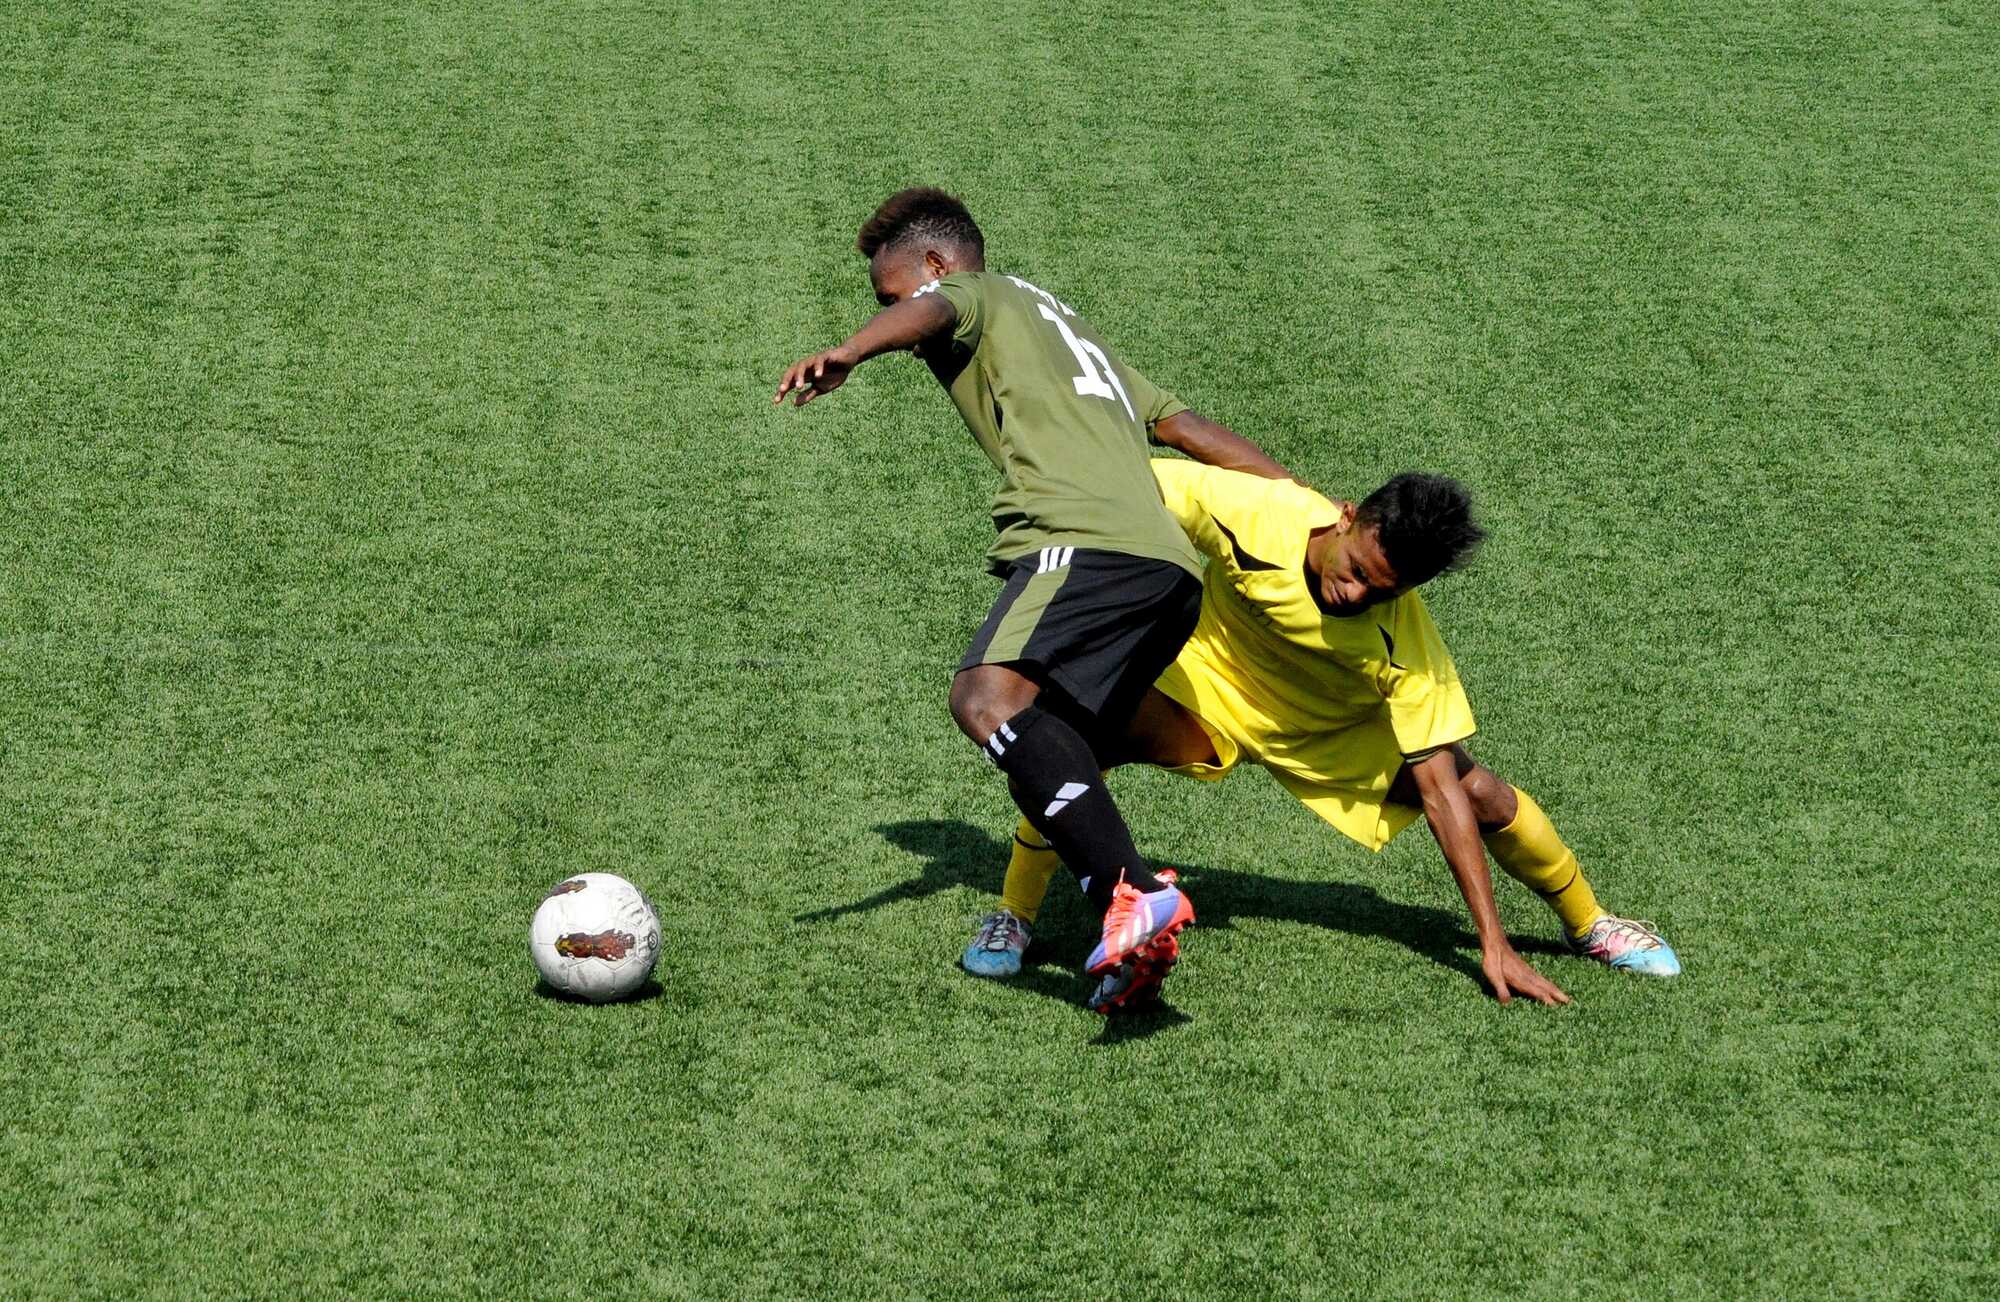 Photograph of two boys playing soccer on synthetic turf.